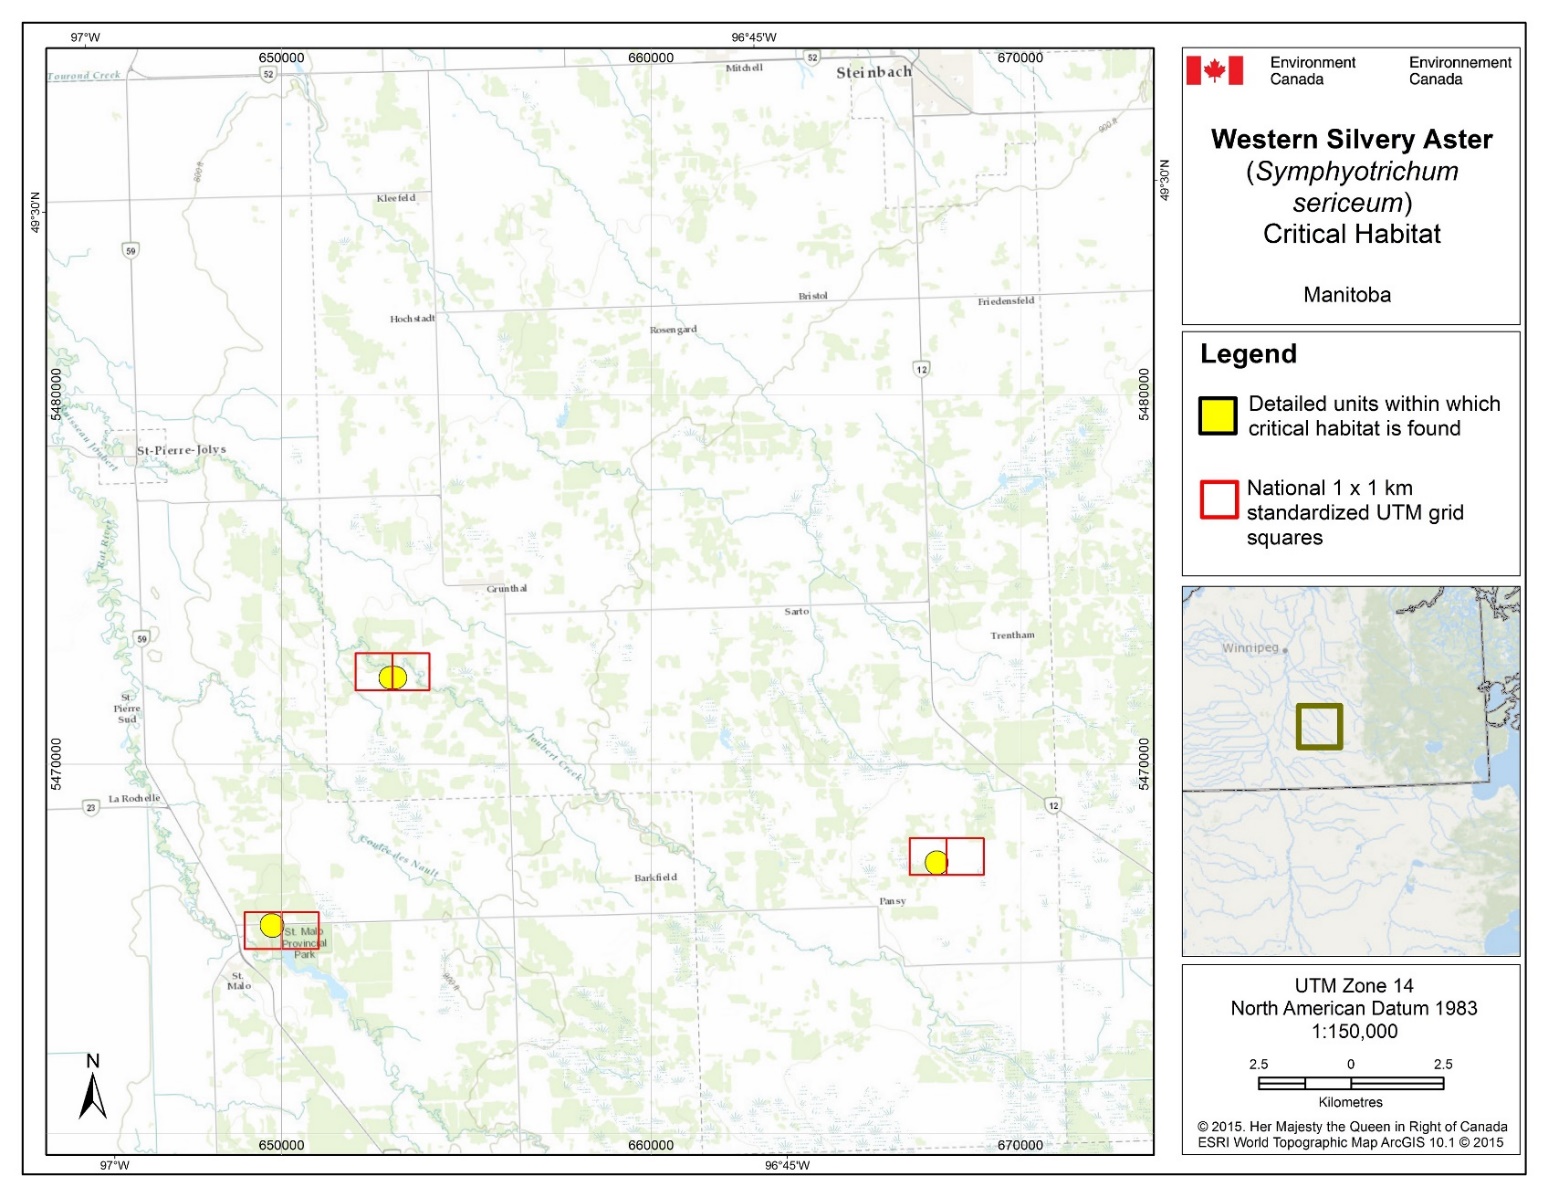 Figure B3: Map of Critical habitat for Western Silvery Aster in Manitoba